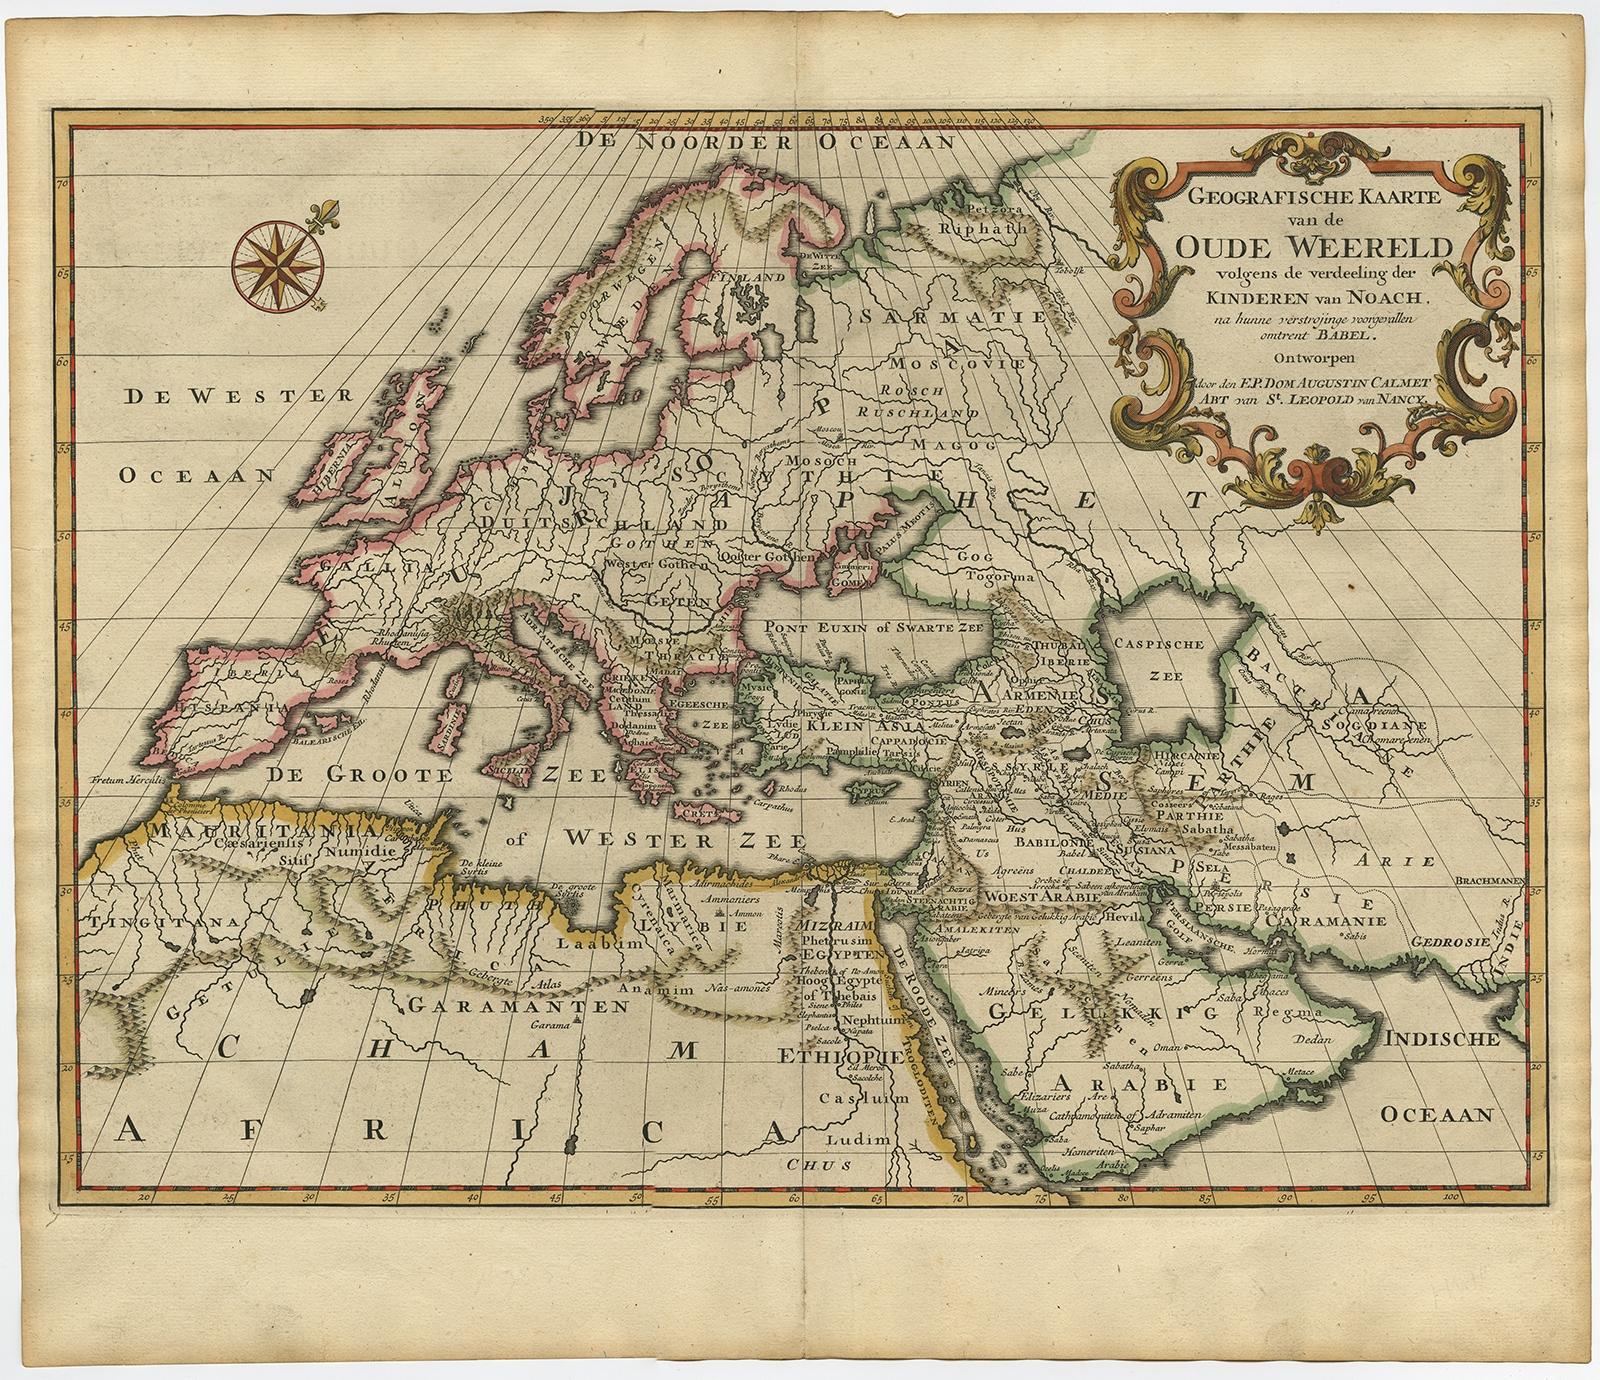 Antique map titled 'Geografische Kaarte van de Oude Weereld (..).' 

Original antique map of the ancient world depicting Europe, Asia, and northern Africa with ancient place names. This map originates from volume 1 of 'Het algemeen groot